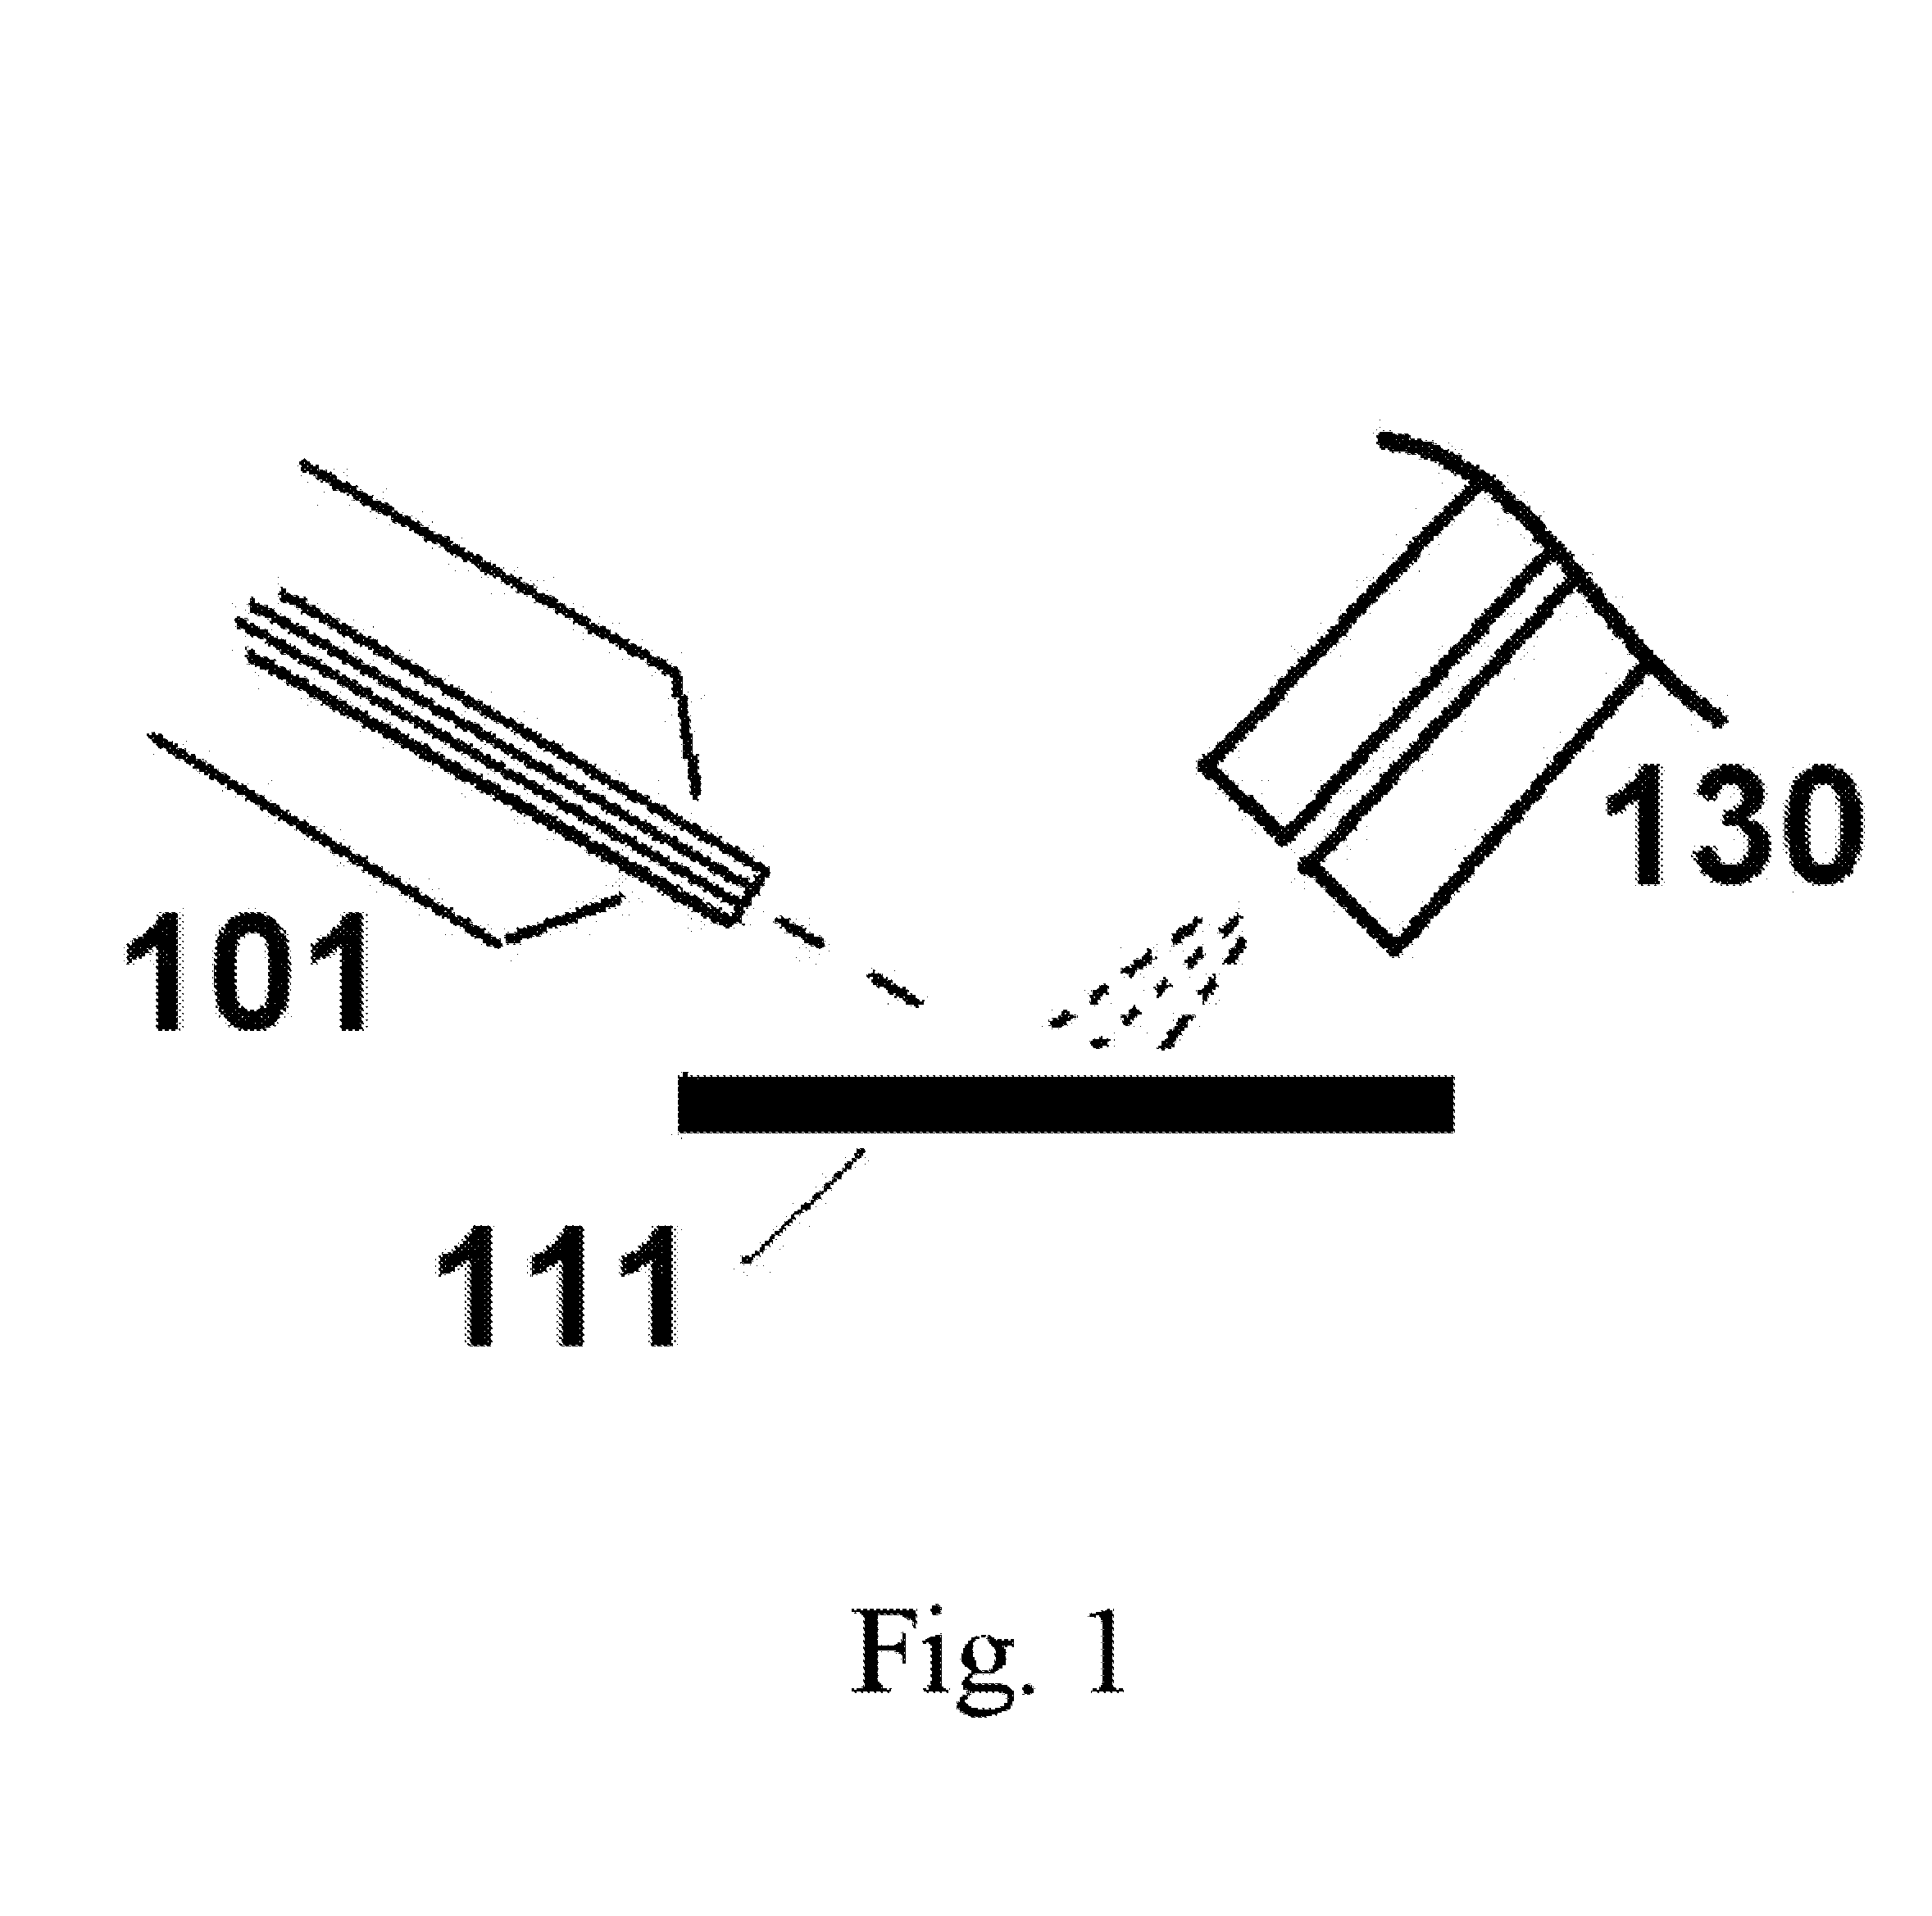 Flexible open tube sampling system for use with surface ionization technology